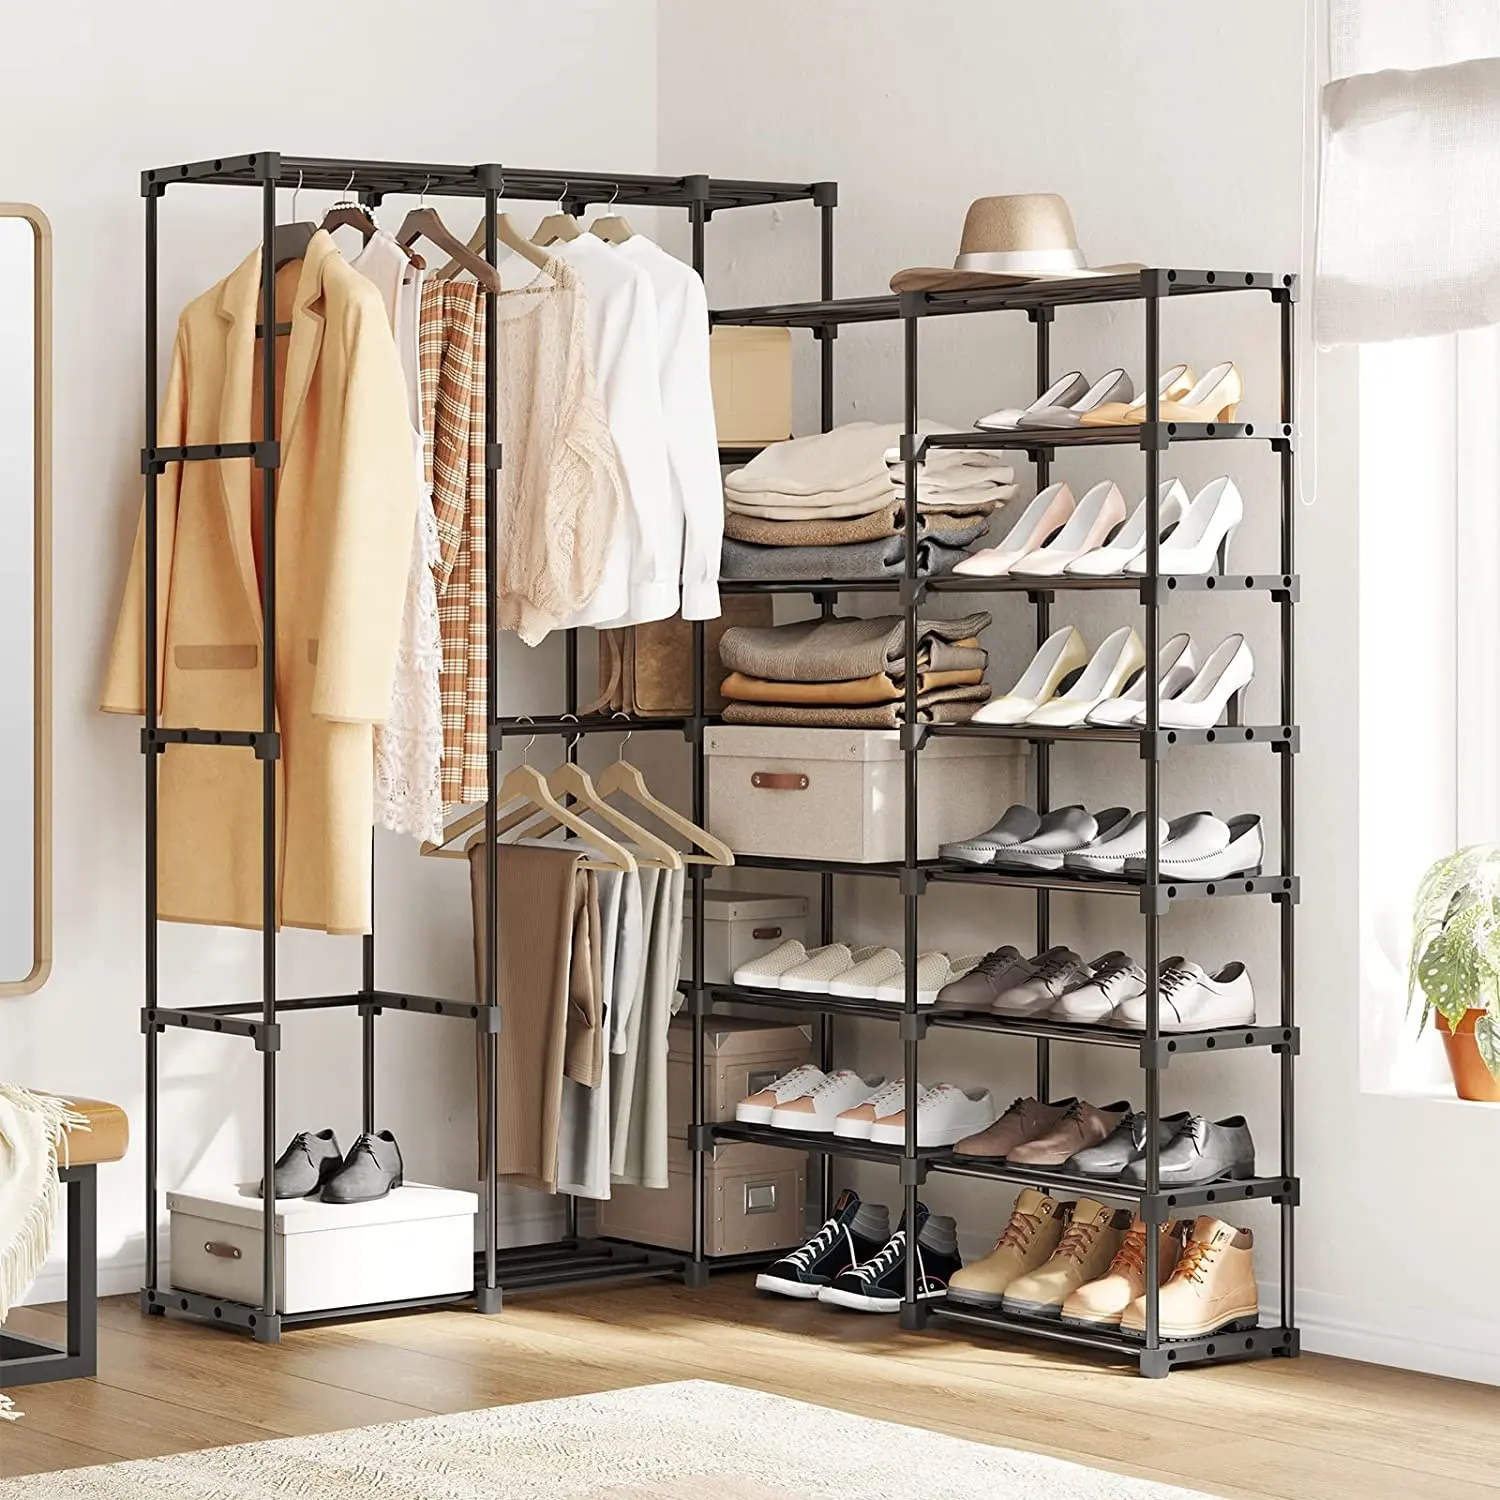 DIY Portable Closet Wardrobe with Shoe Rack for Hanging Clothes shoes storage